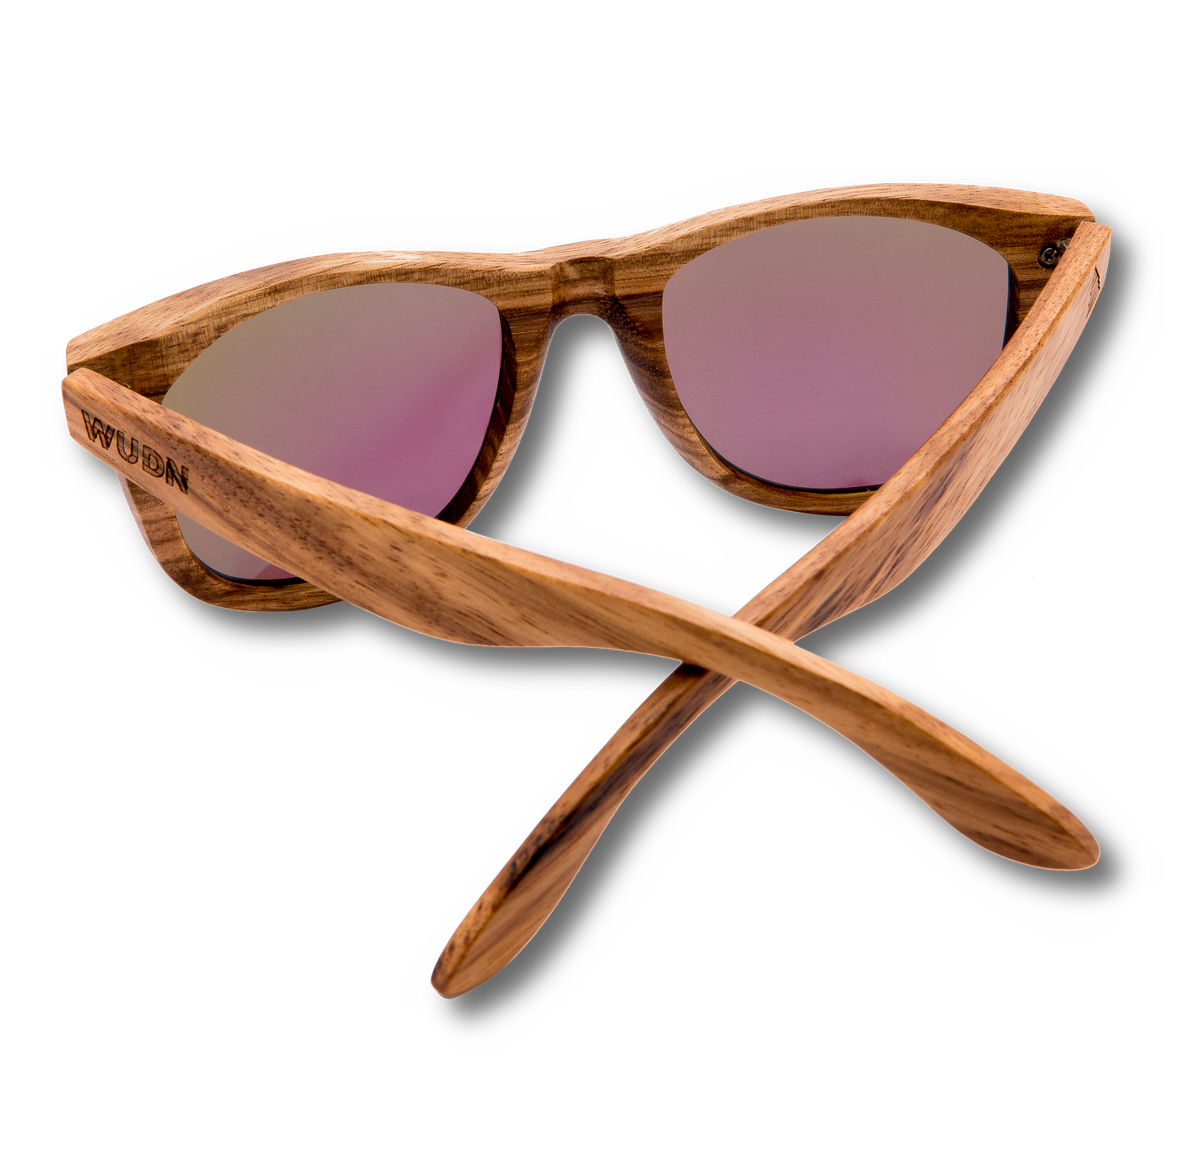 Wooden Sunglasses WUDN Spring Blowout double your spending power with a 100% Giftcard Bonus on every order.